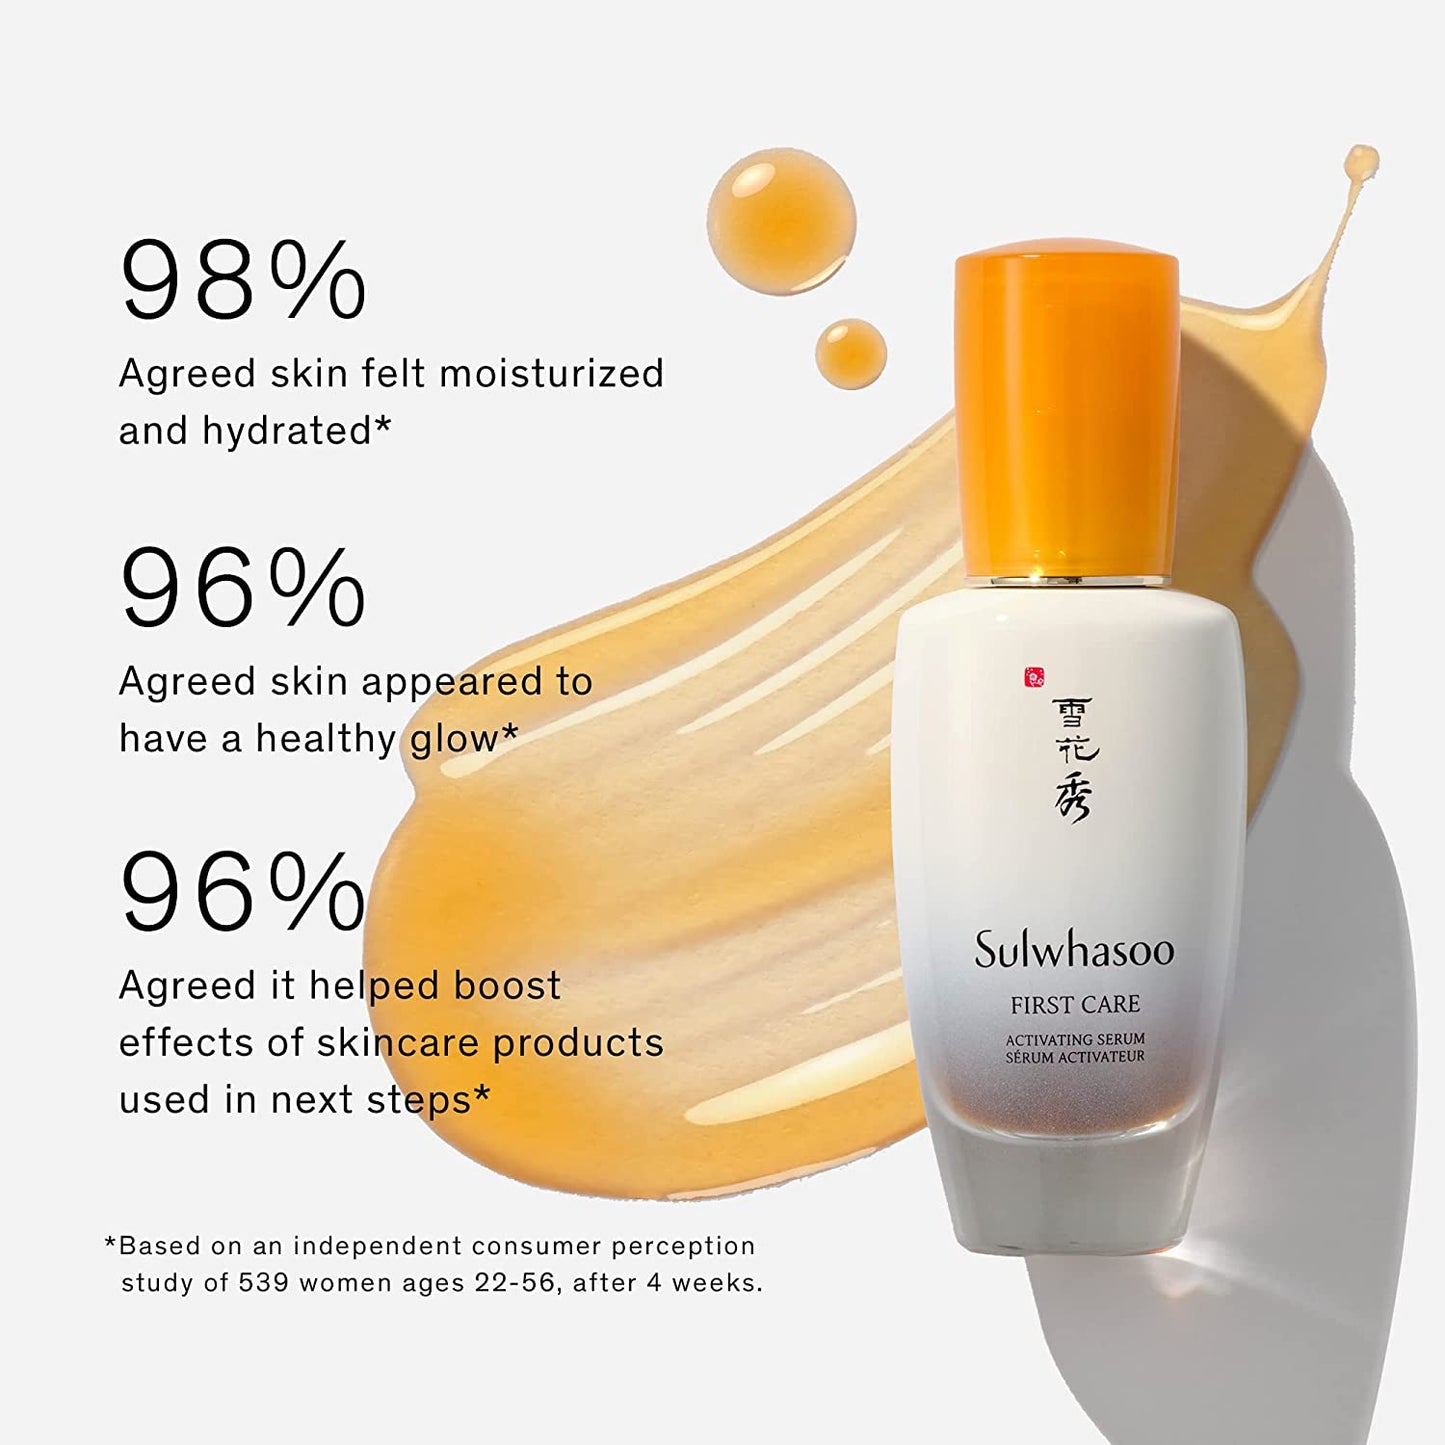 Sulwhasoo First Care Activating Serum 2.02 Fl. Oz./ 60 mL